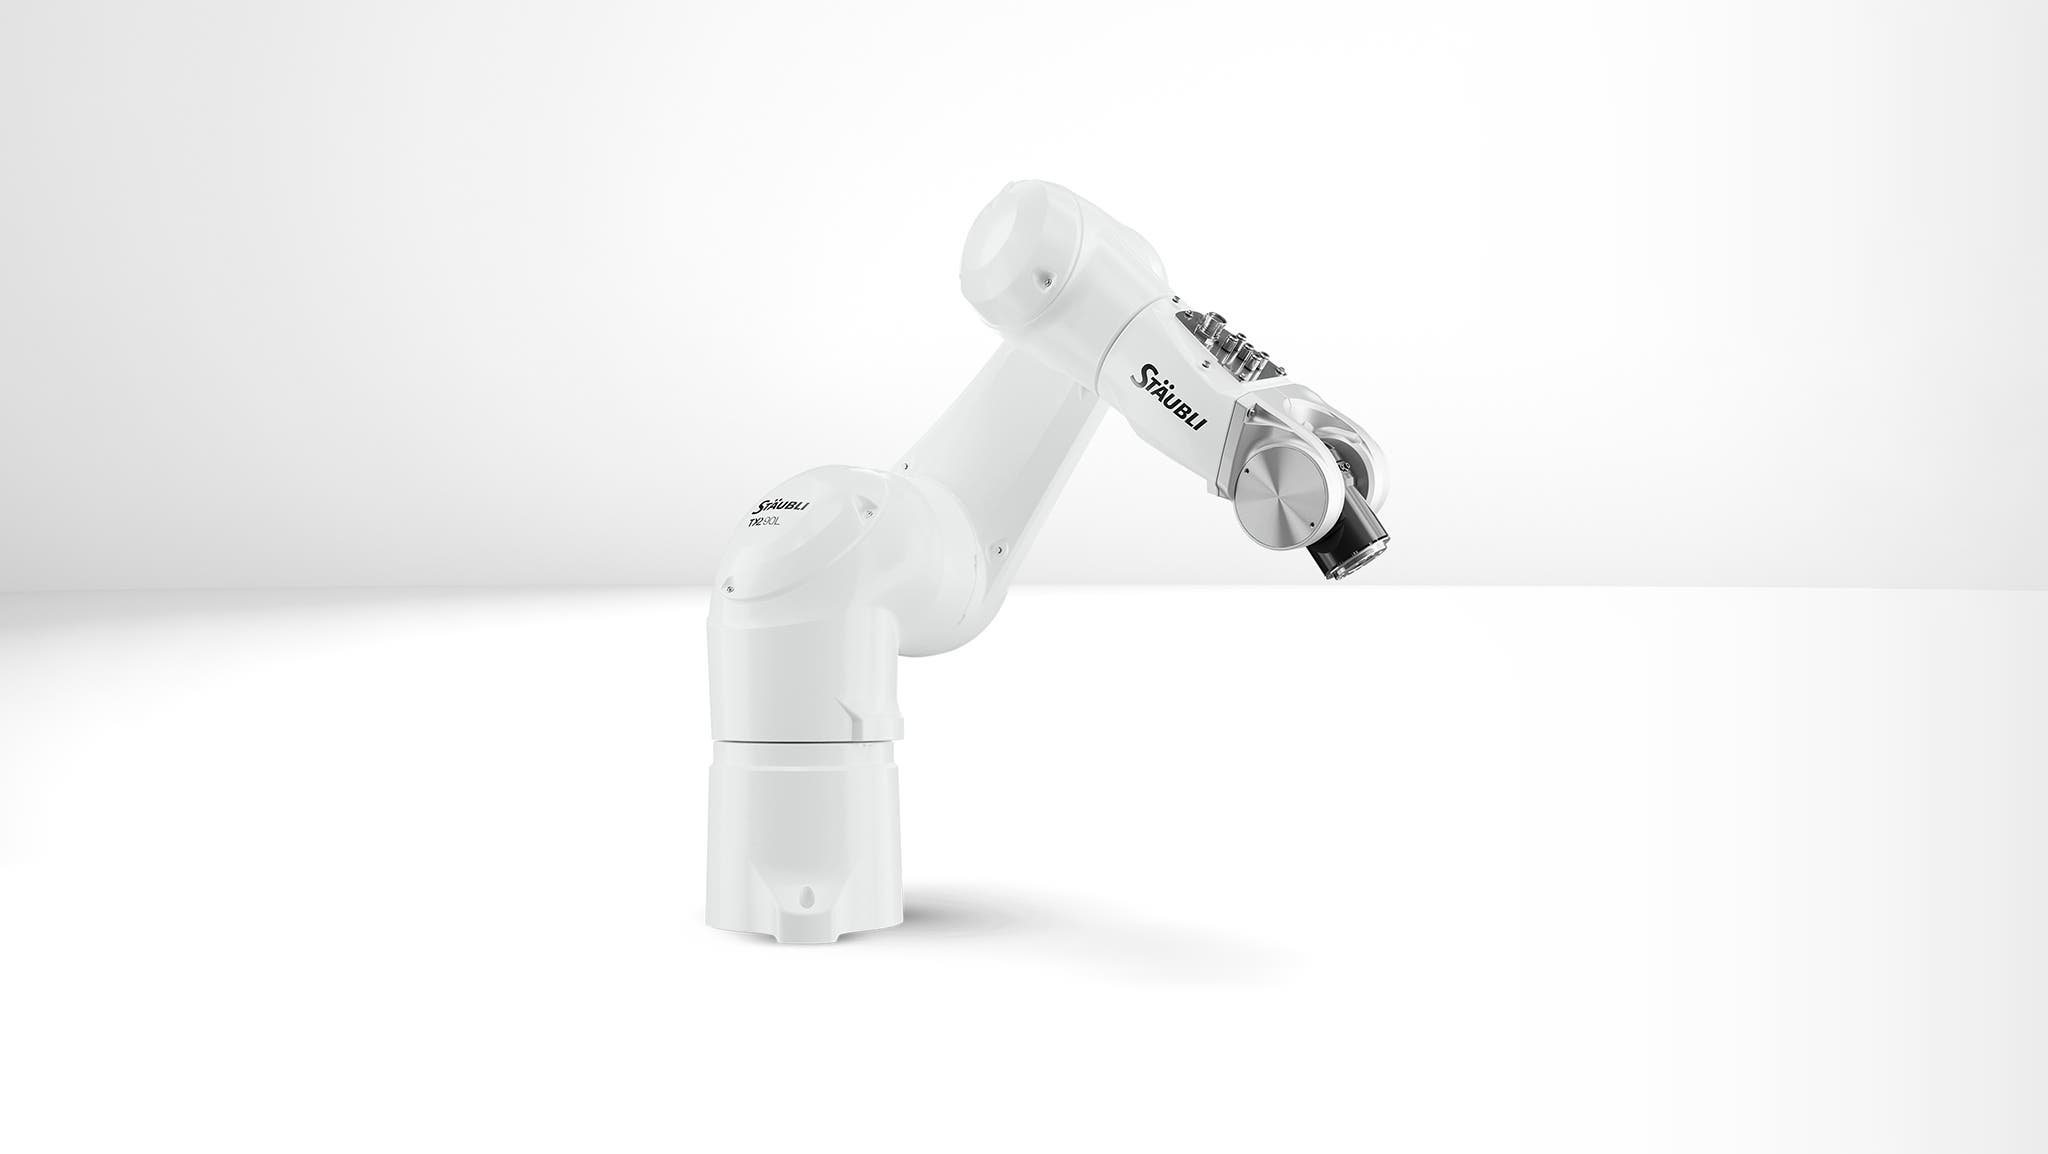 Cleanroom industrial robot